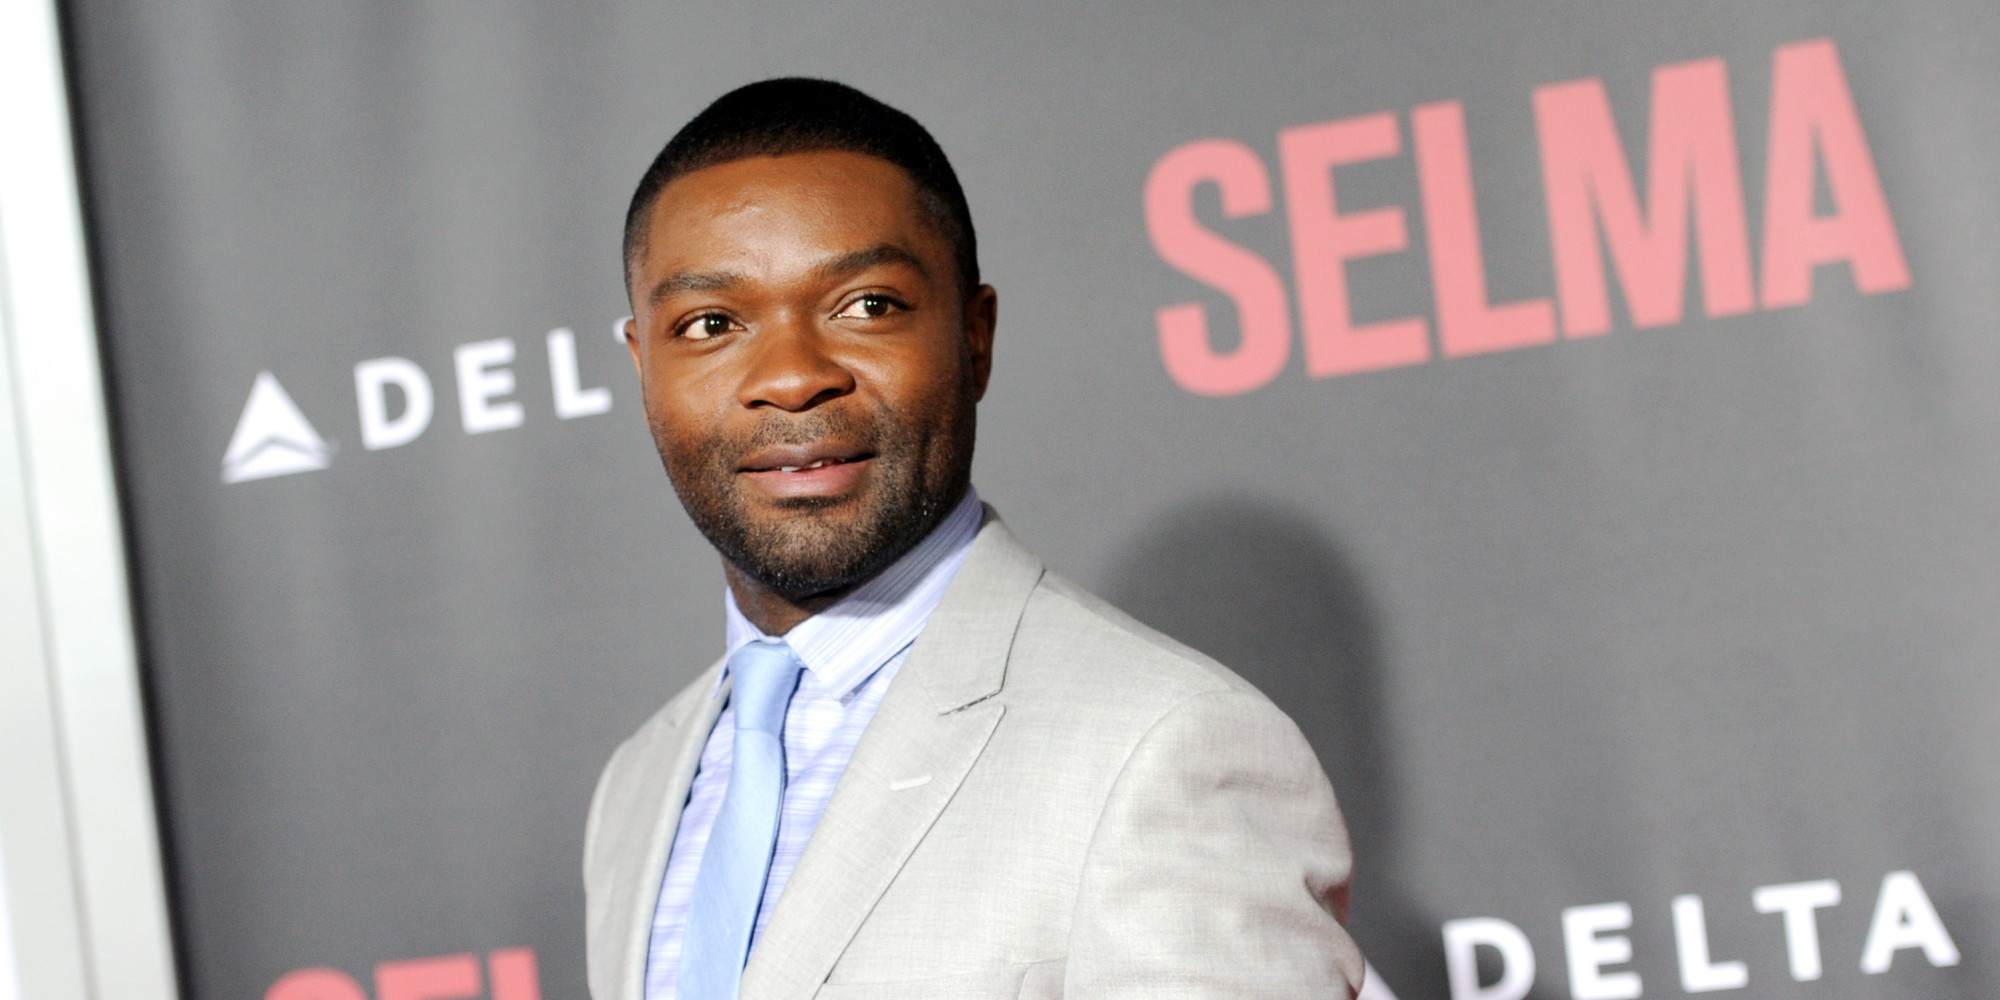 Actor David Oyelowo attends the premiere of "Selma" at the Ziegfeld Theatre on Sunday, Dec. 14, 2014, in New York. (Photo by Evan Agostini/Invision/AP)